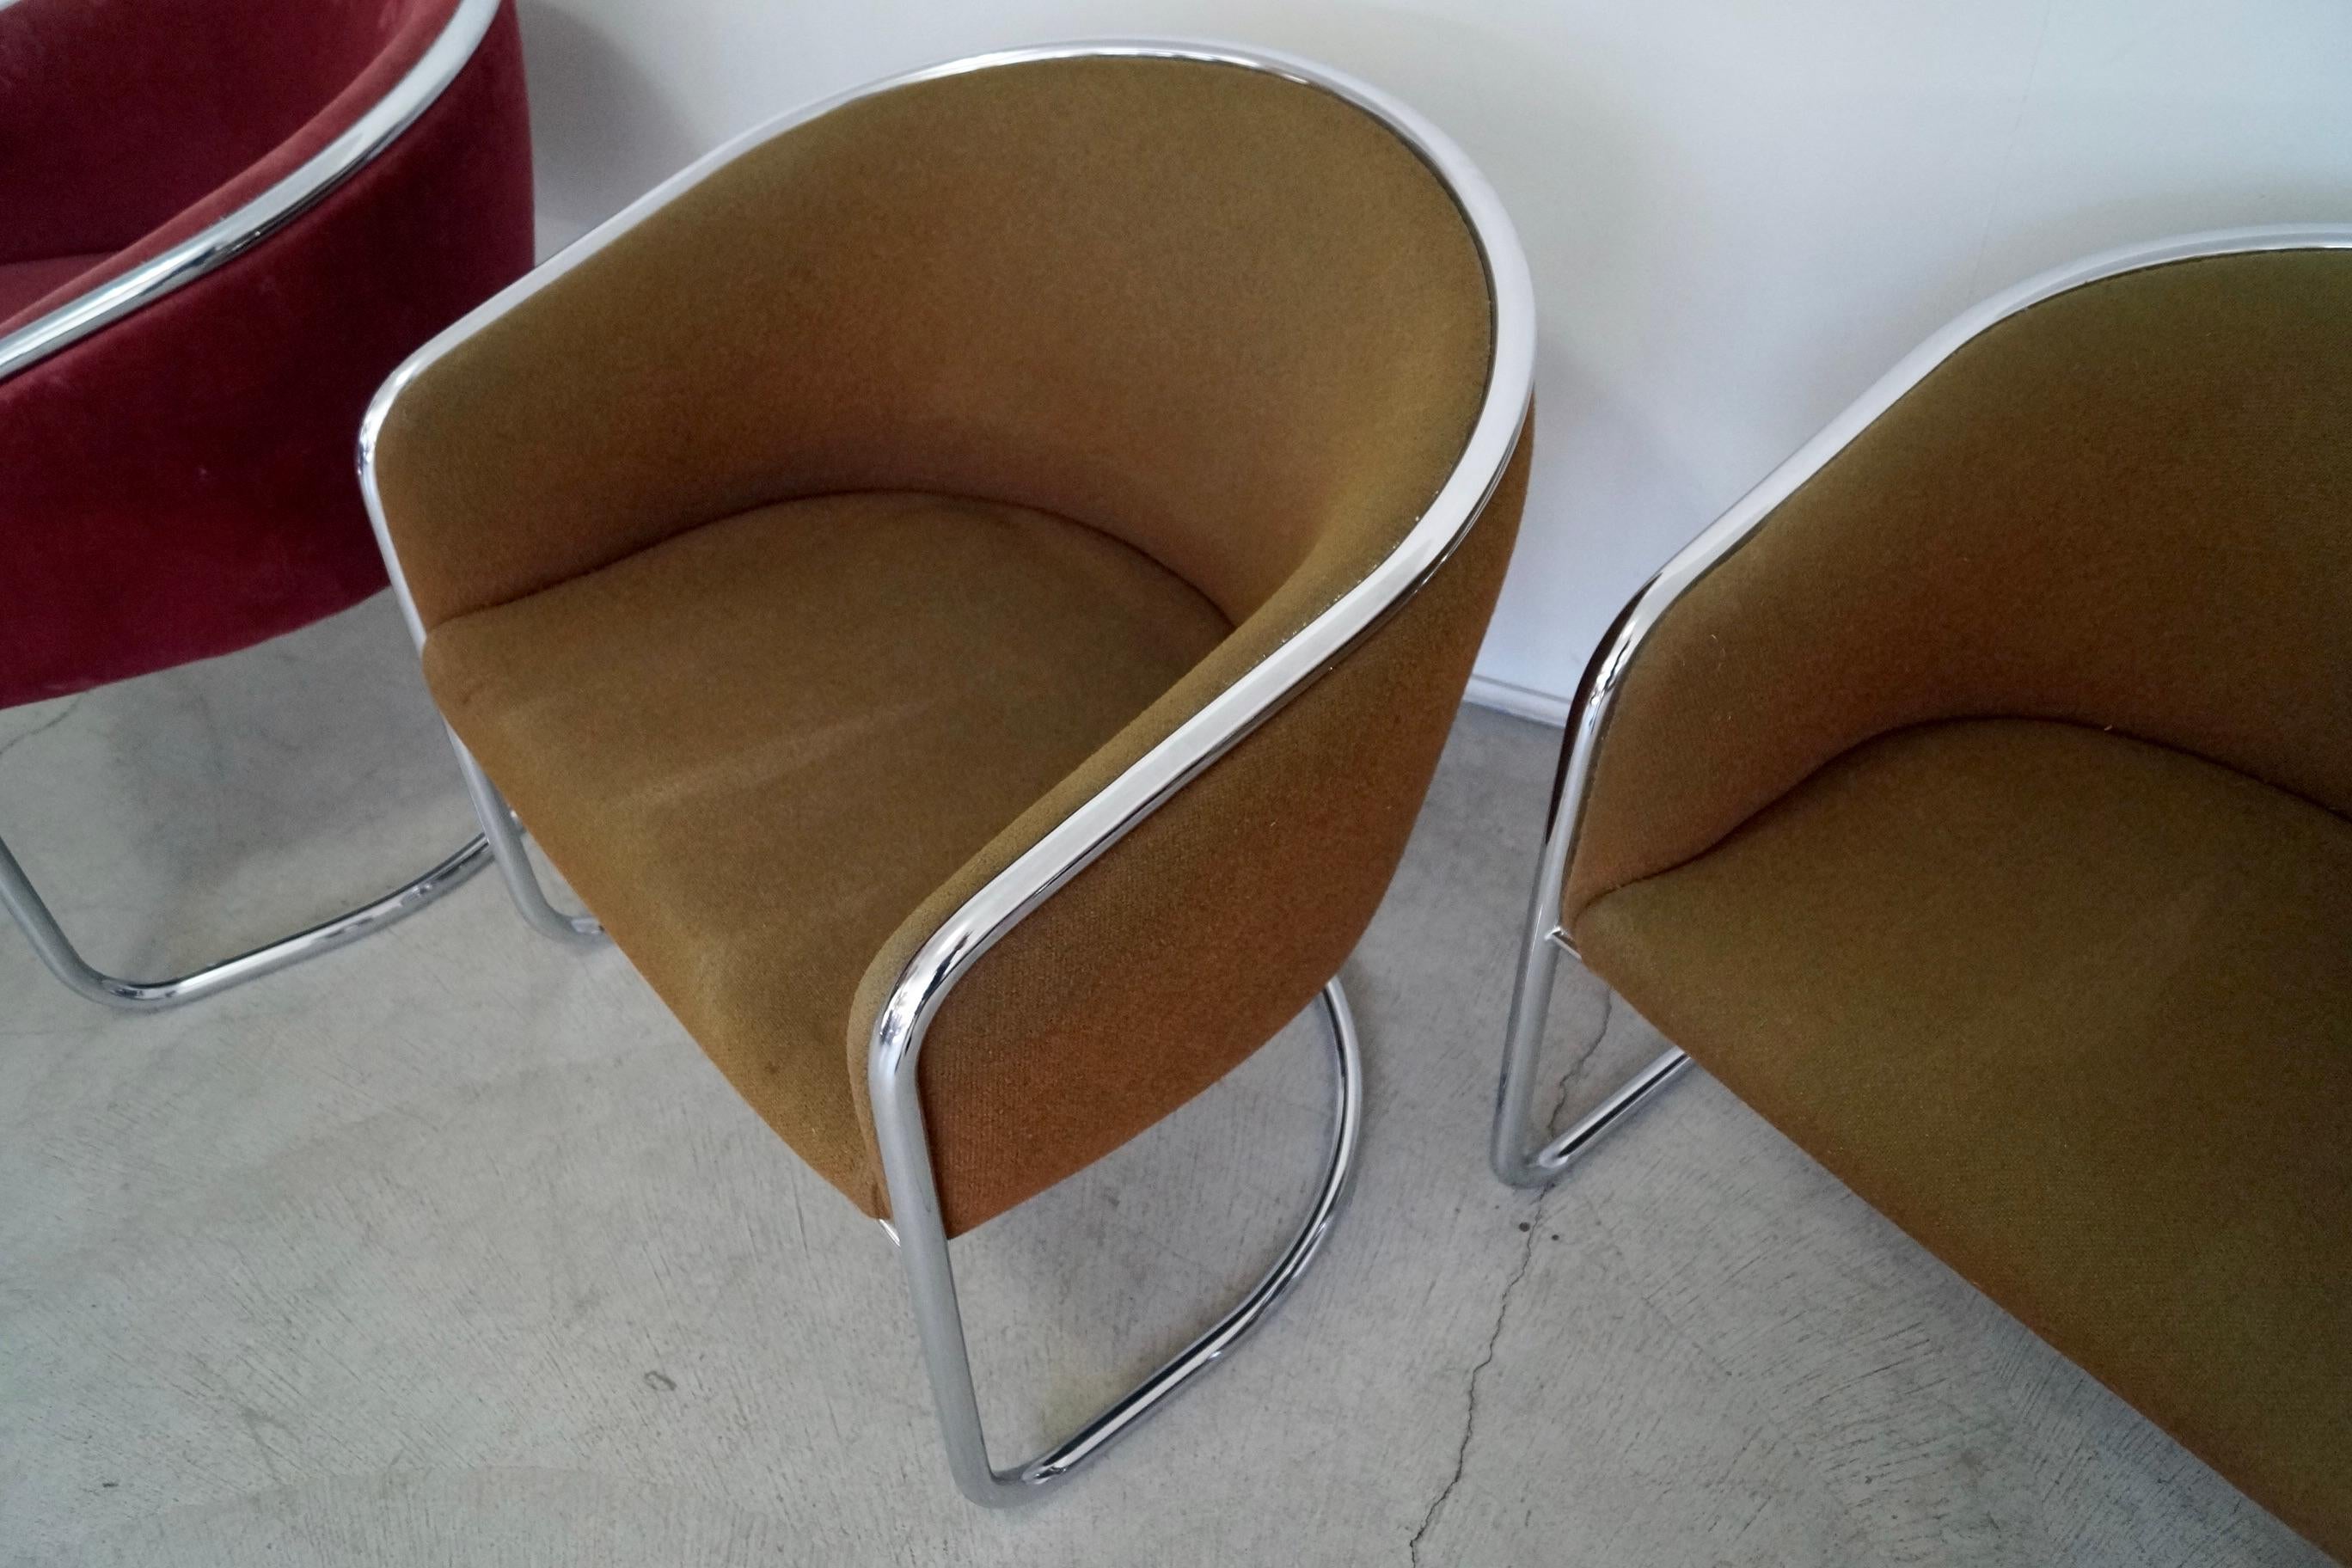 1970's Mid-Century Modern Thonet Chrome Armchairs - Set of Four For Sale 10